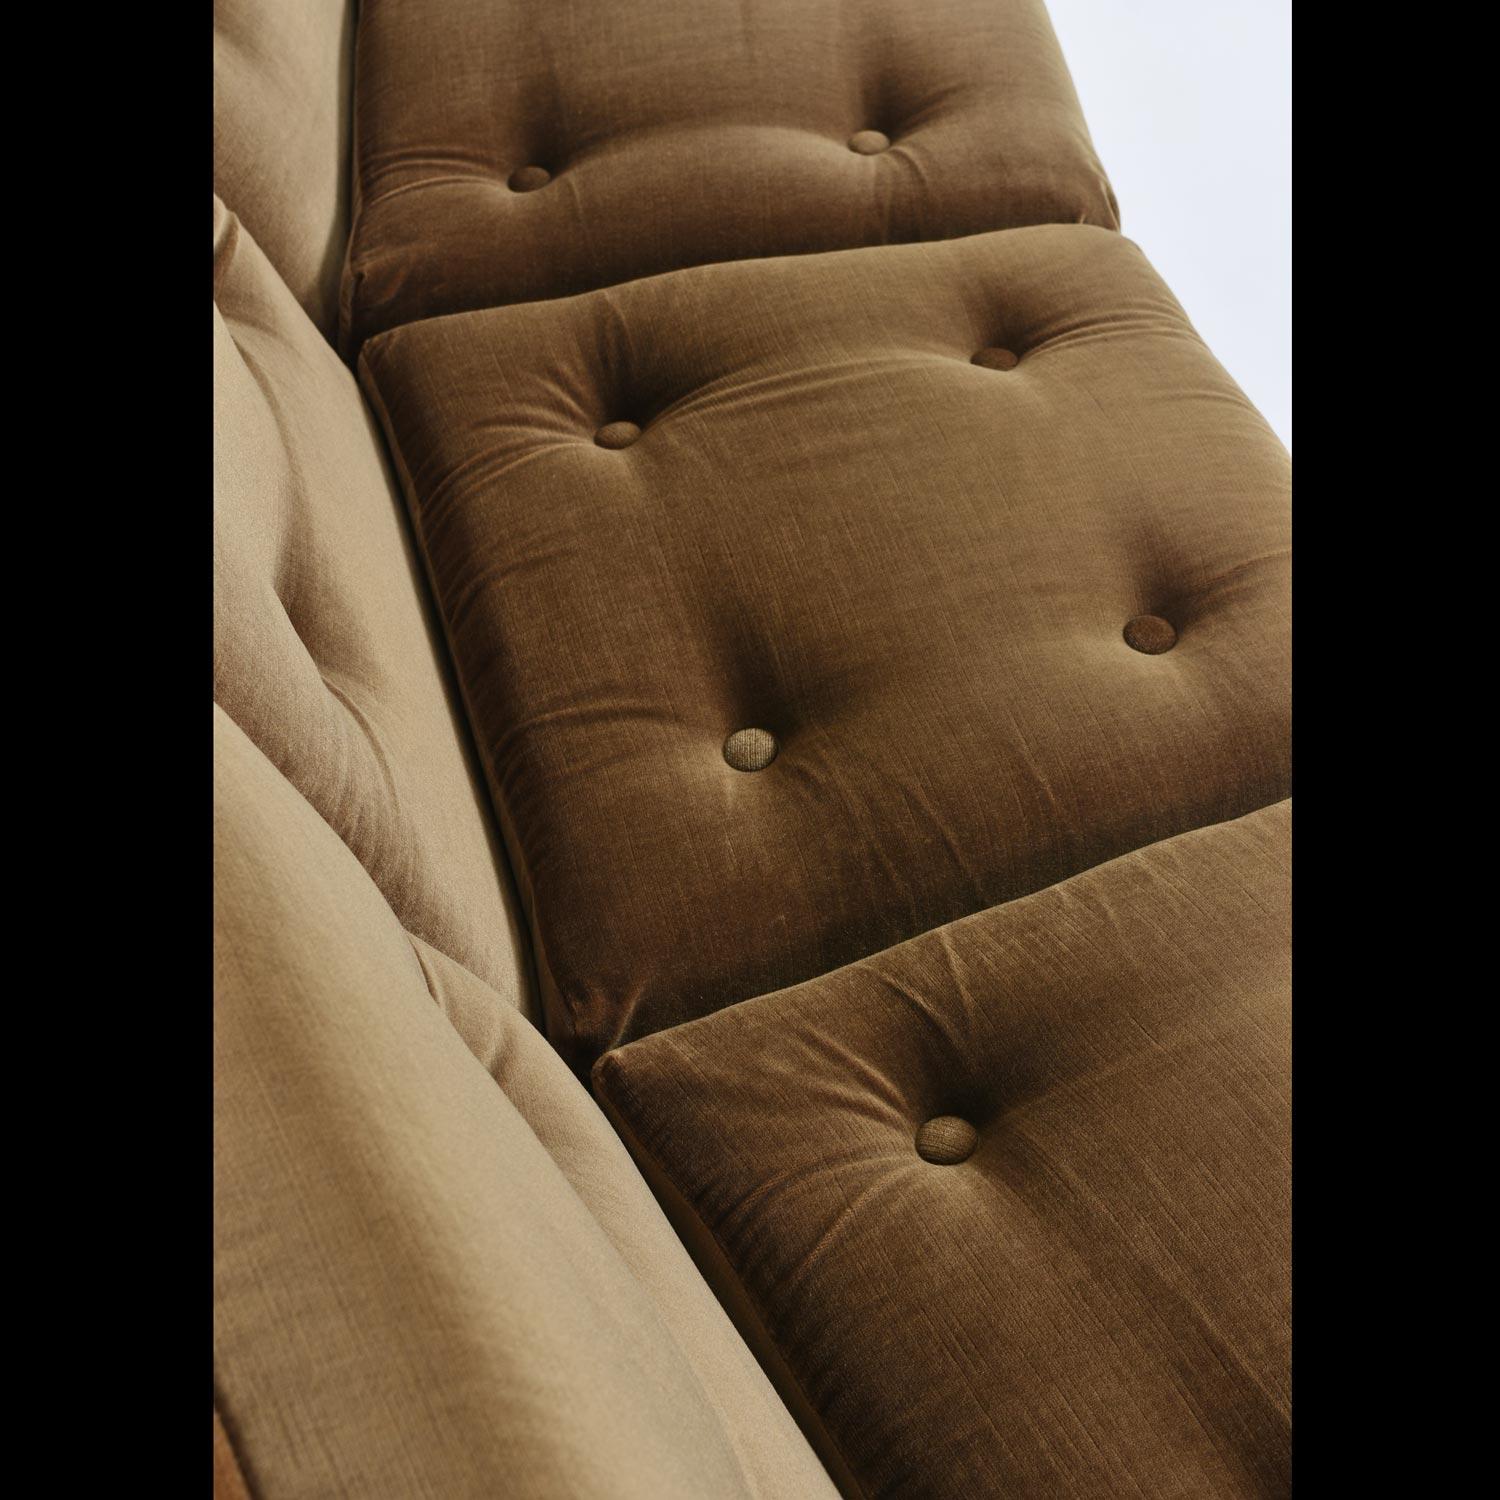 Late 20th Century Tulip Seating Group in Rosewood by K M Wilkins for G-Plan of England